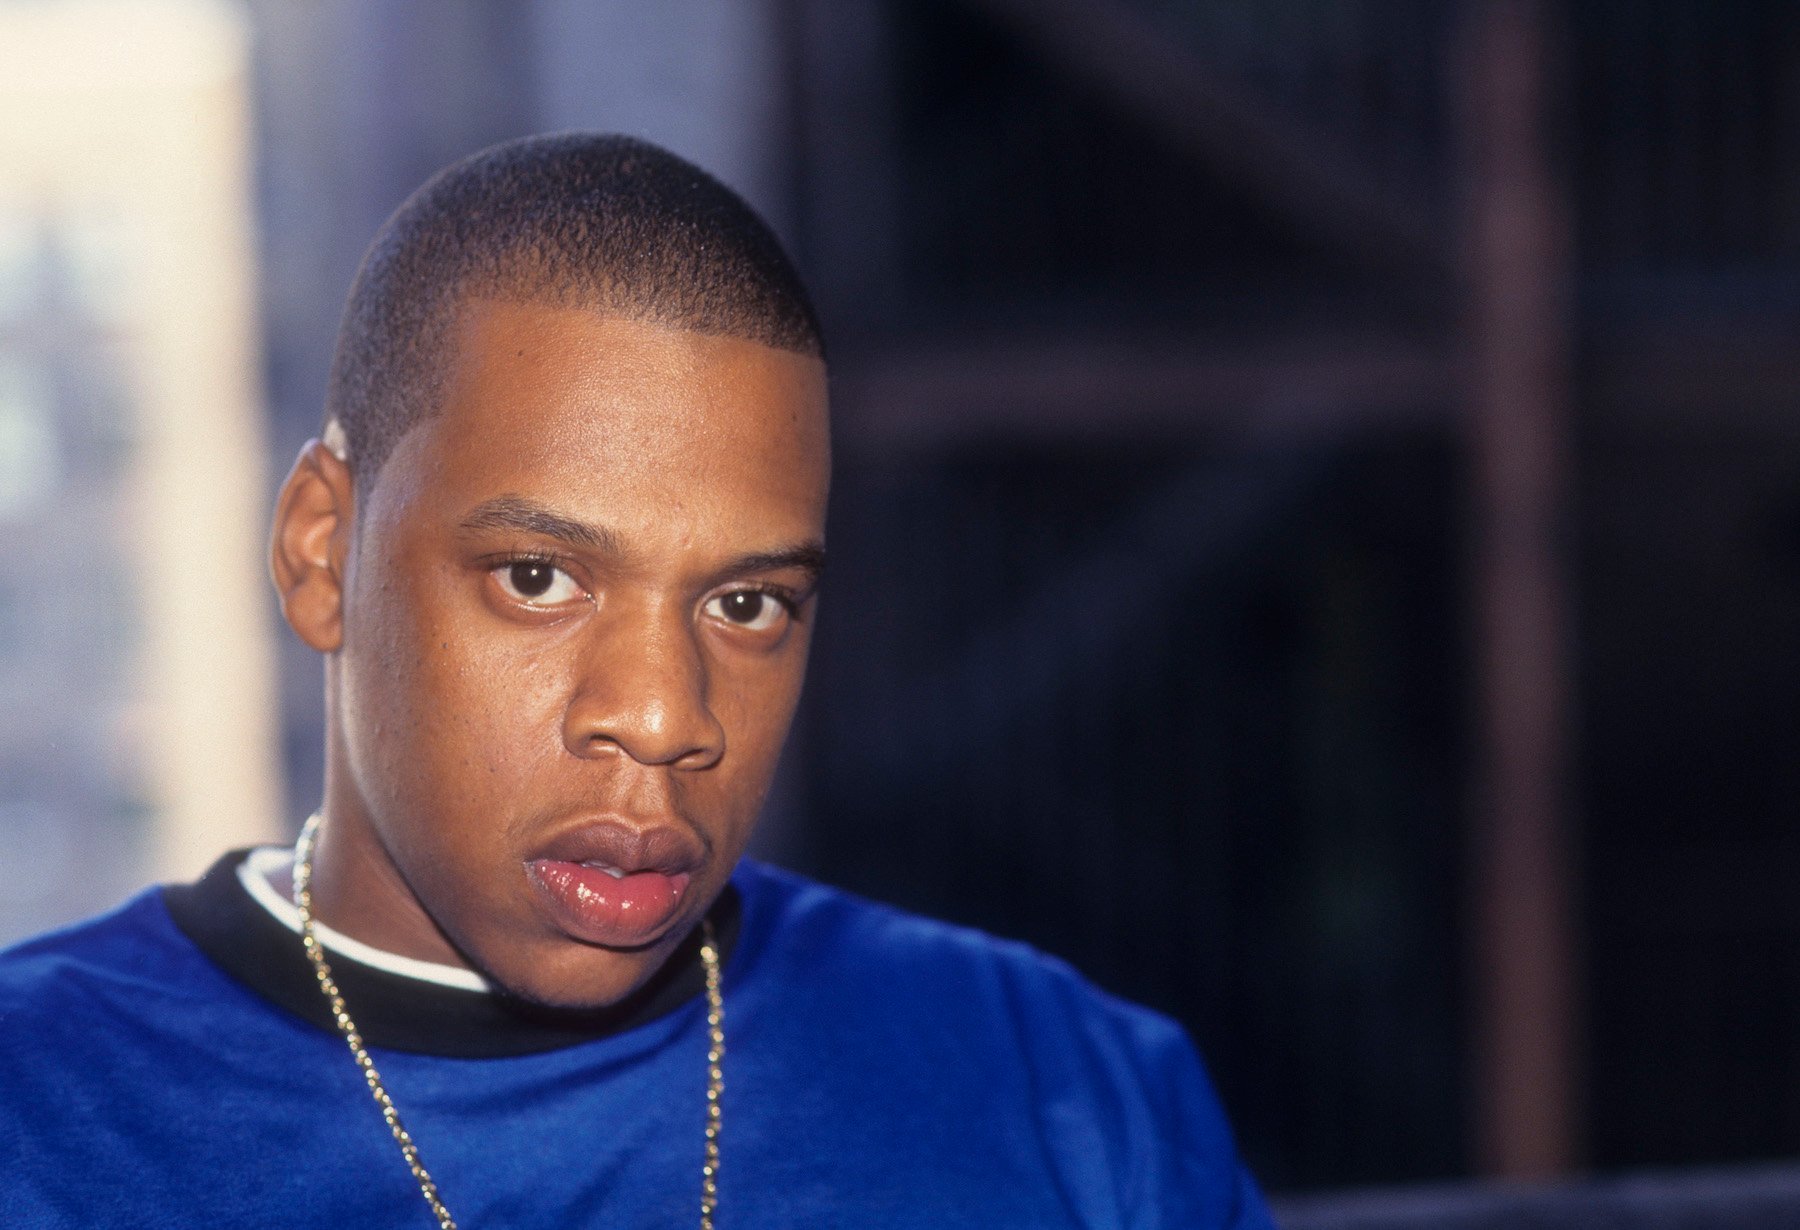 Jay-Z, who has signed countless autographs over the years, posing for a photo wearing a blue sweater